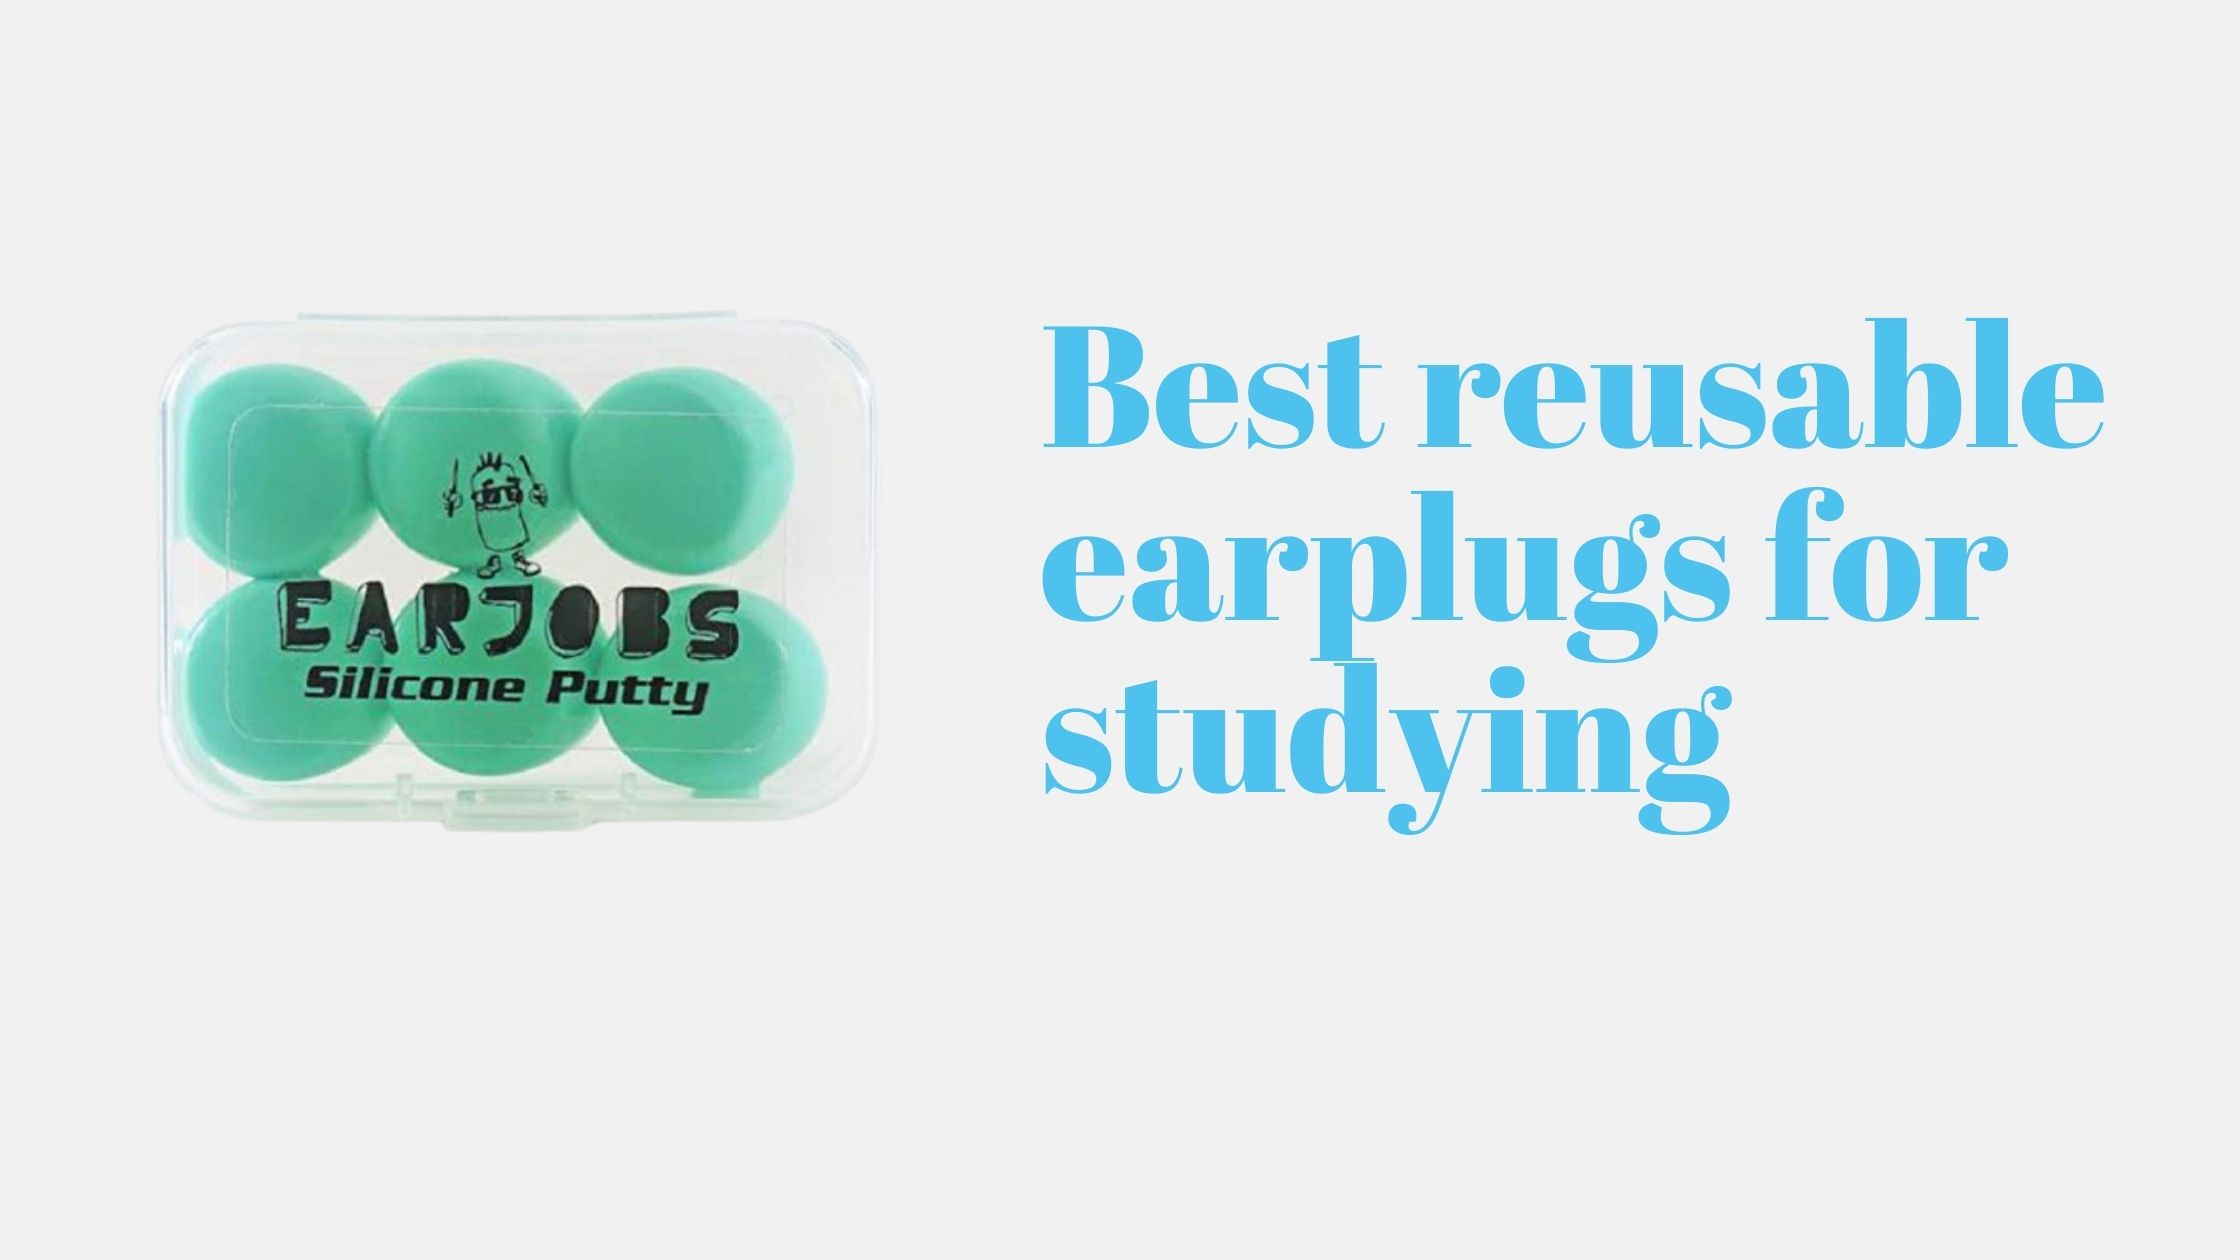 You are currently viewing 12 Best reusable earplugs for studying